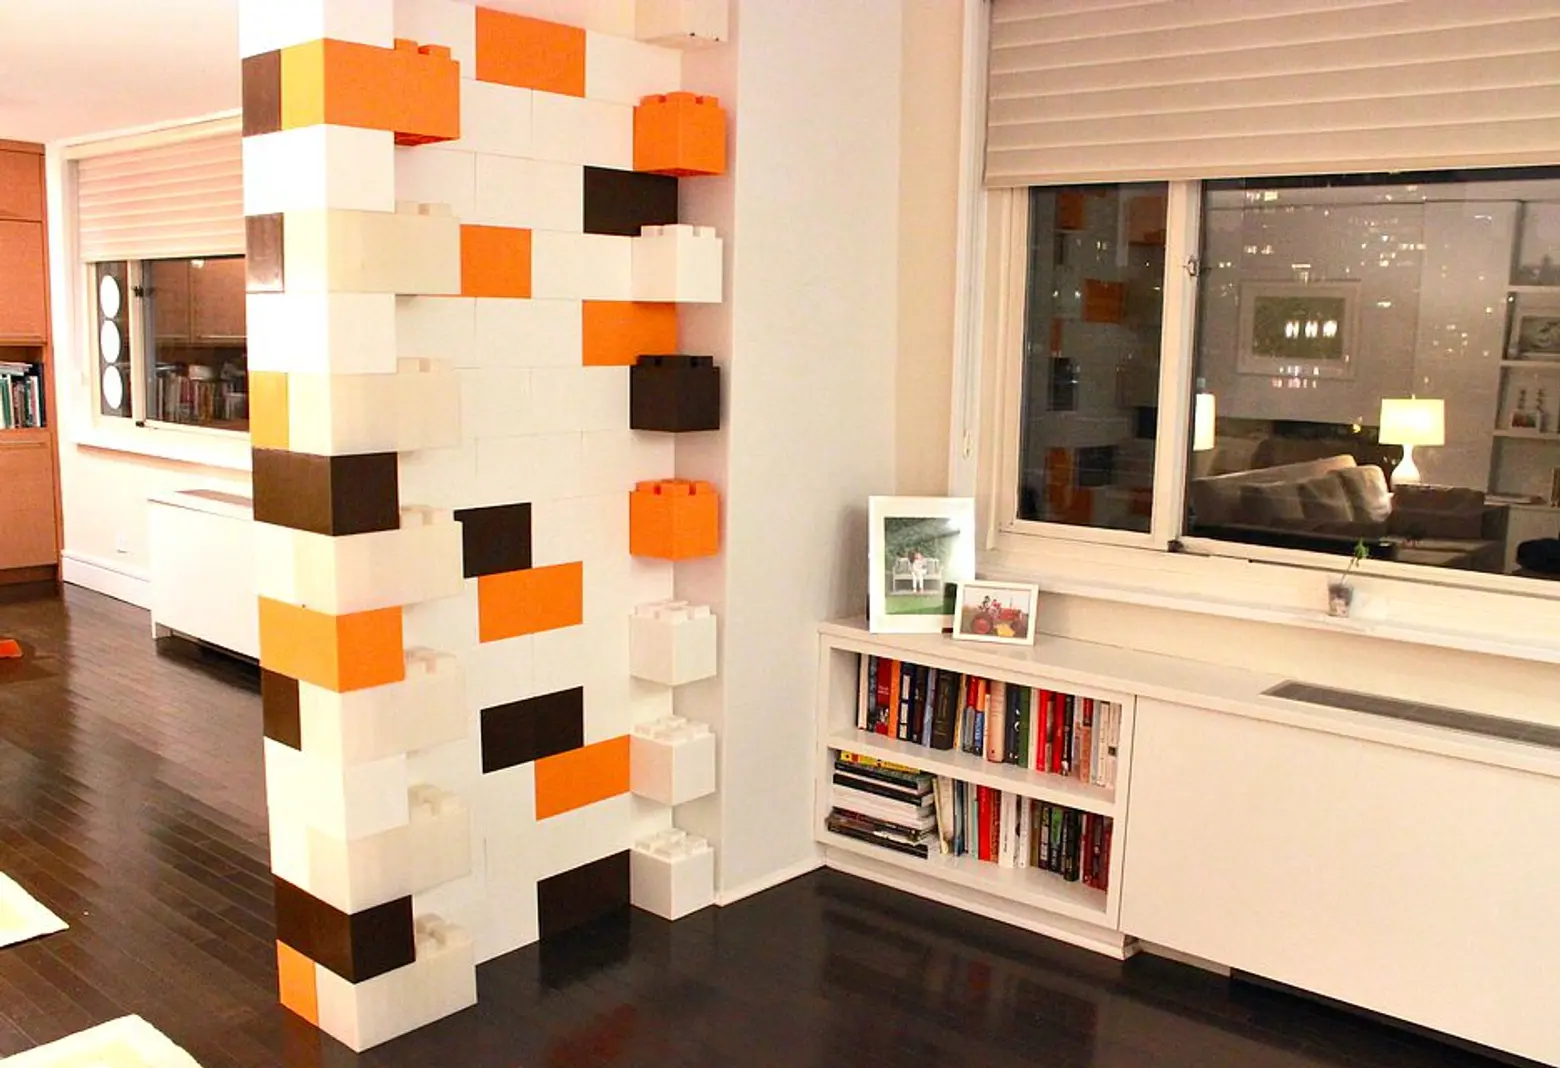 Giant LEGO Blocks Let You Build Anything from a Coffee Table to an Entire Room